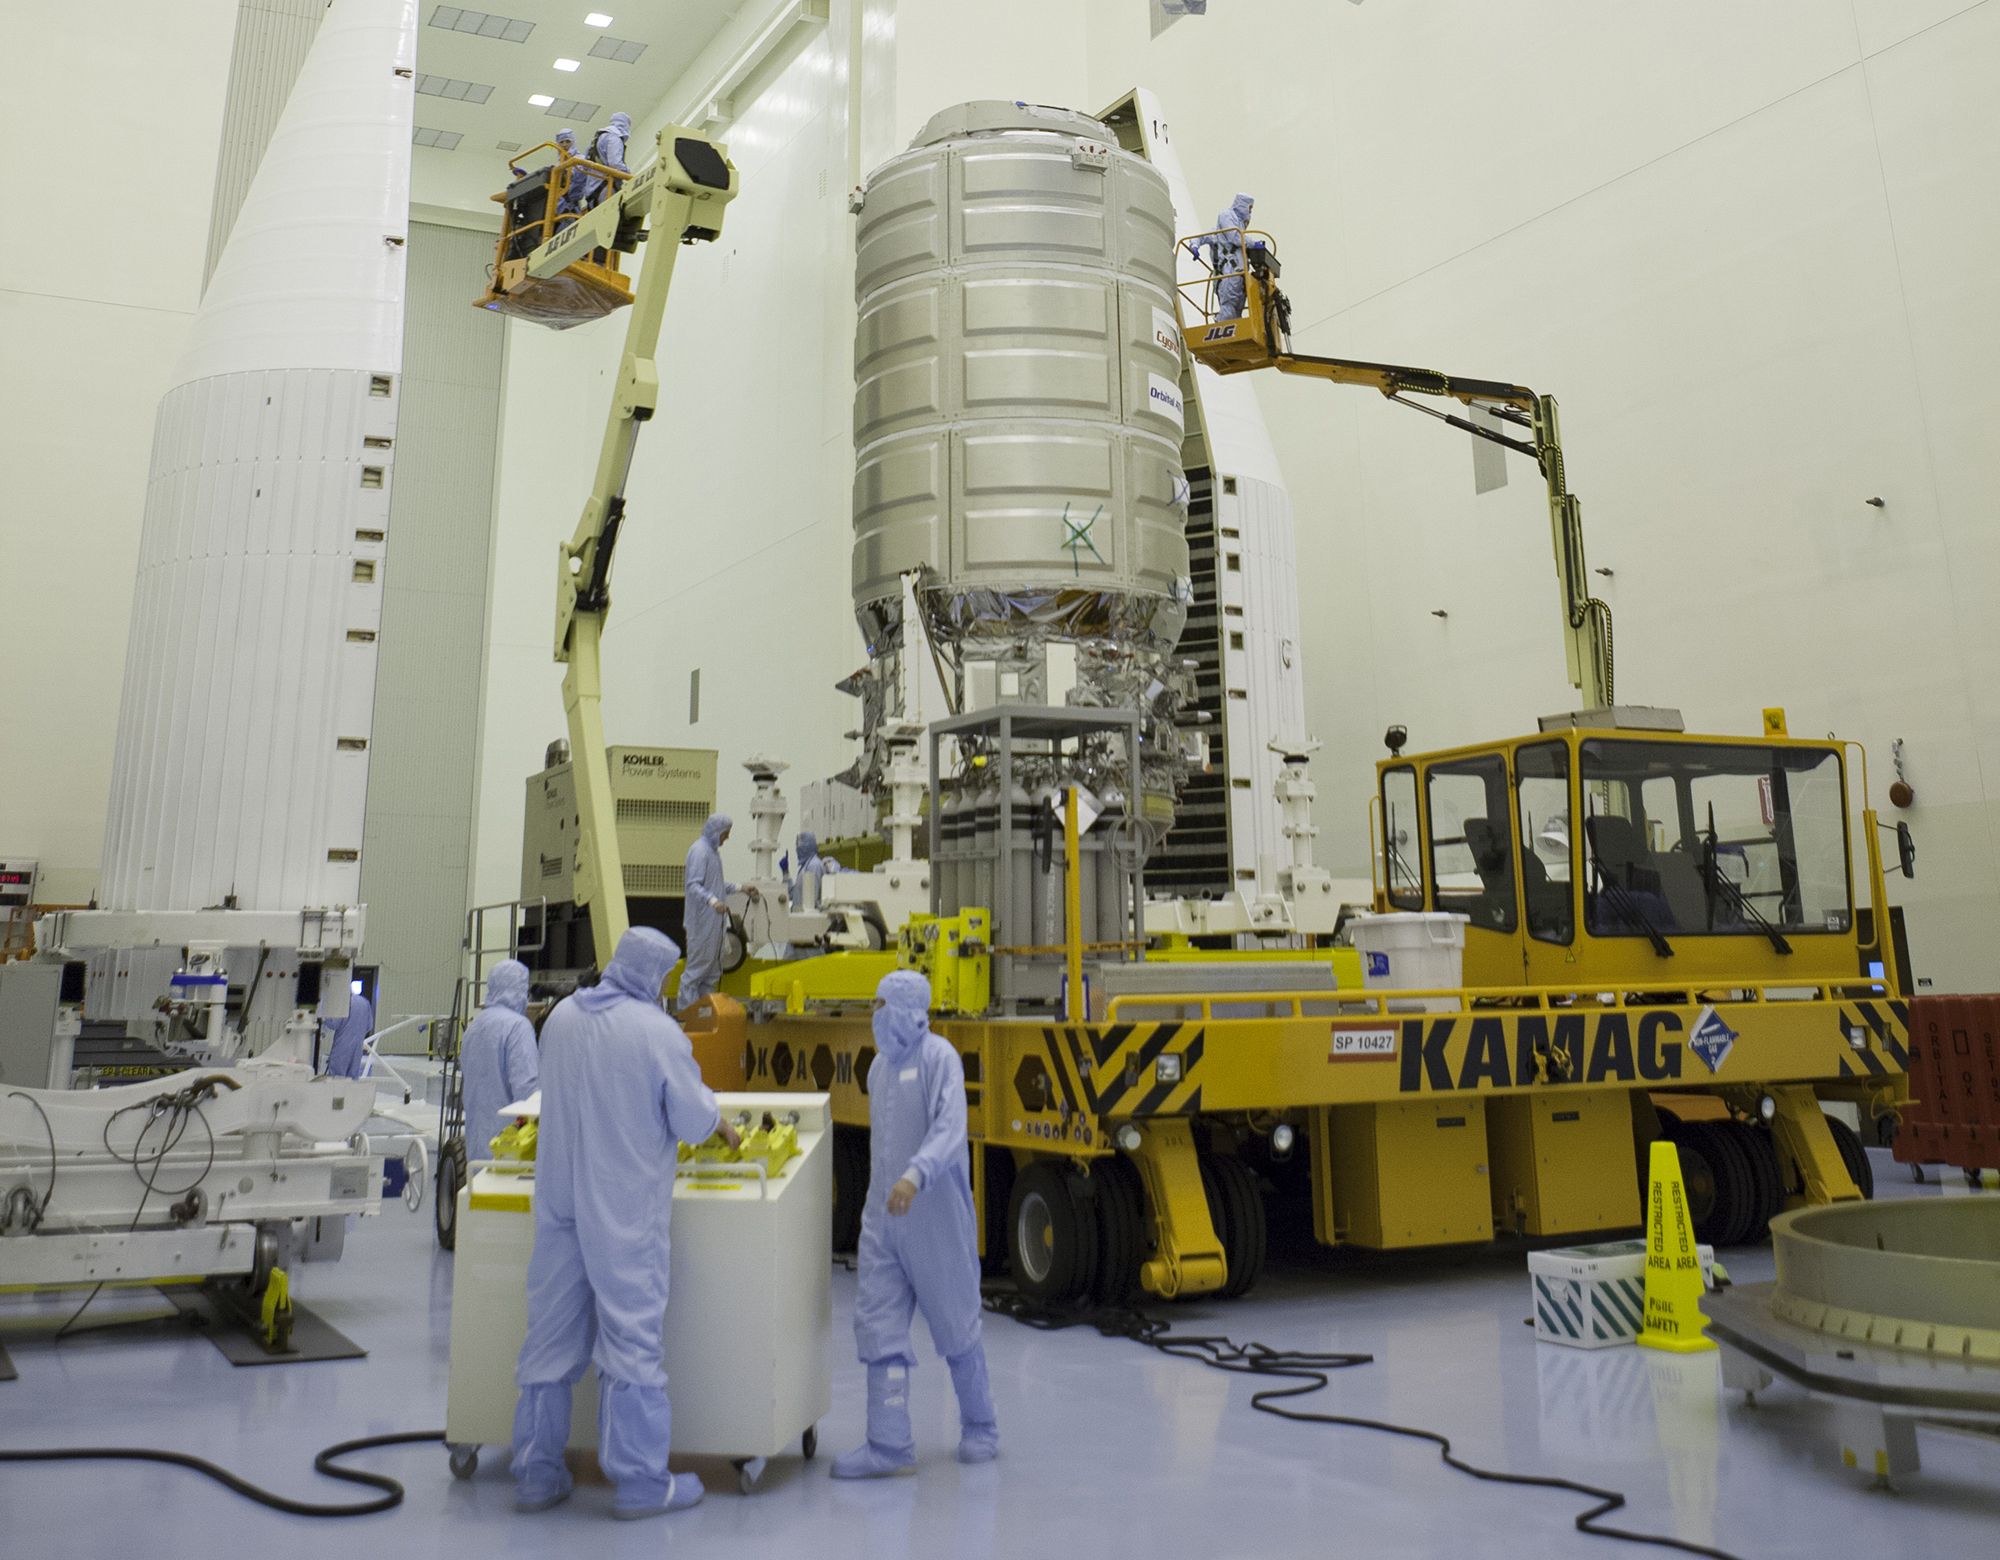 Orbital ATK Cygnus in the Payload Hazardous Servicing Facility at NASA's Kennedy Space Center in Florida